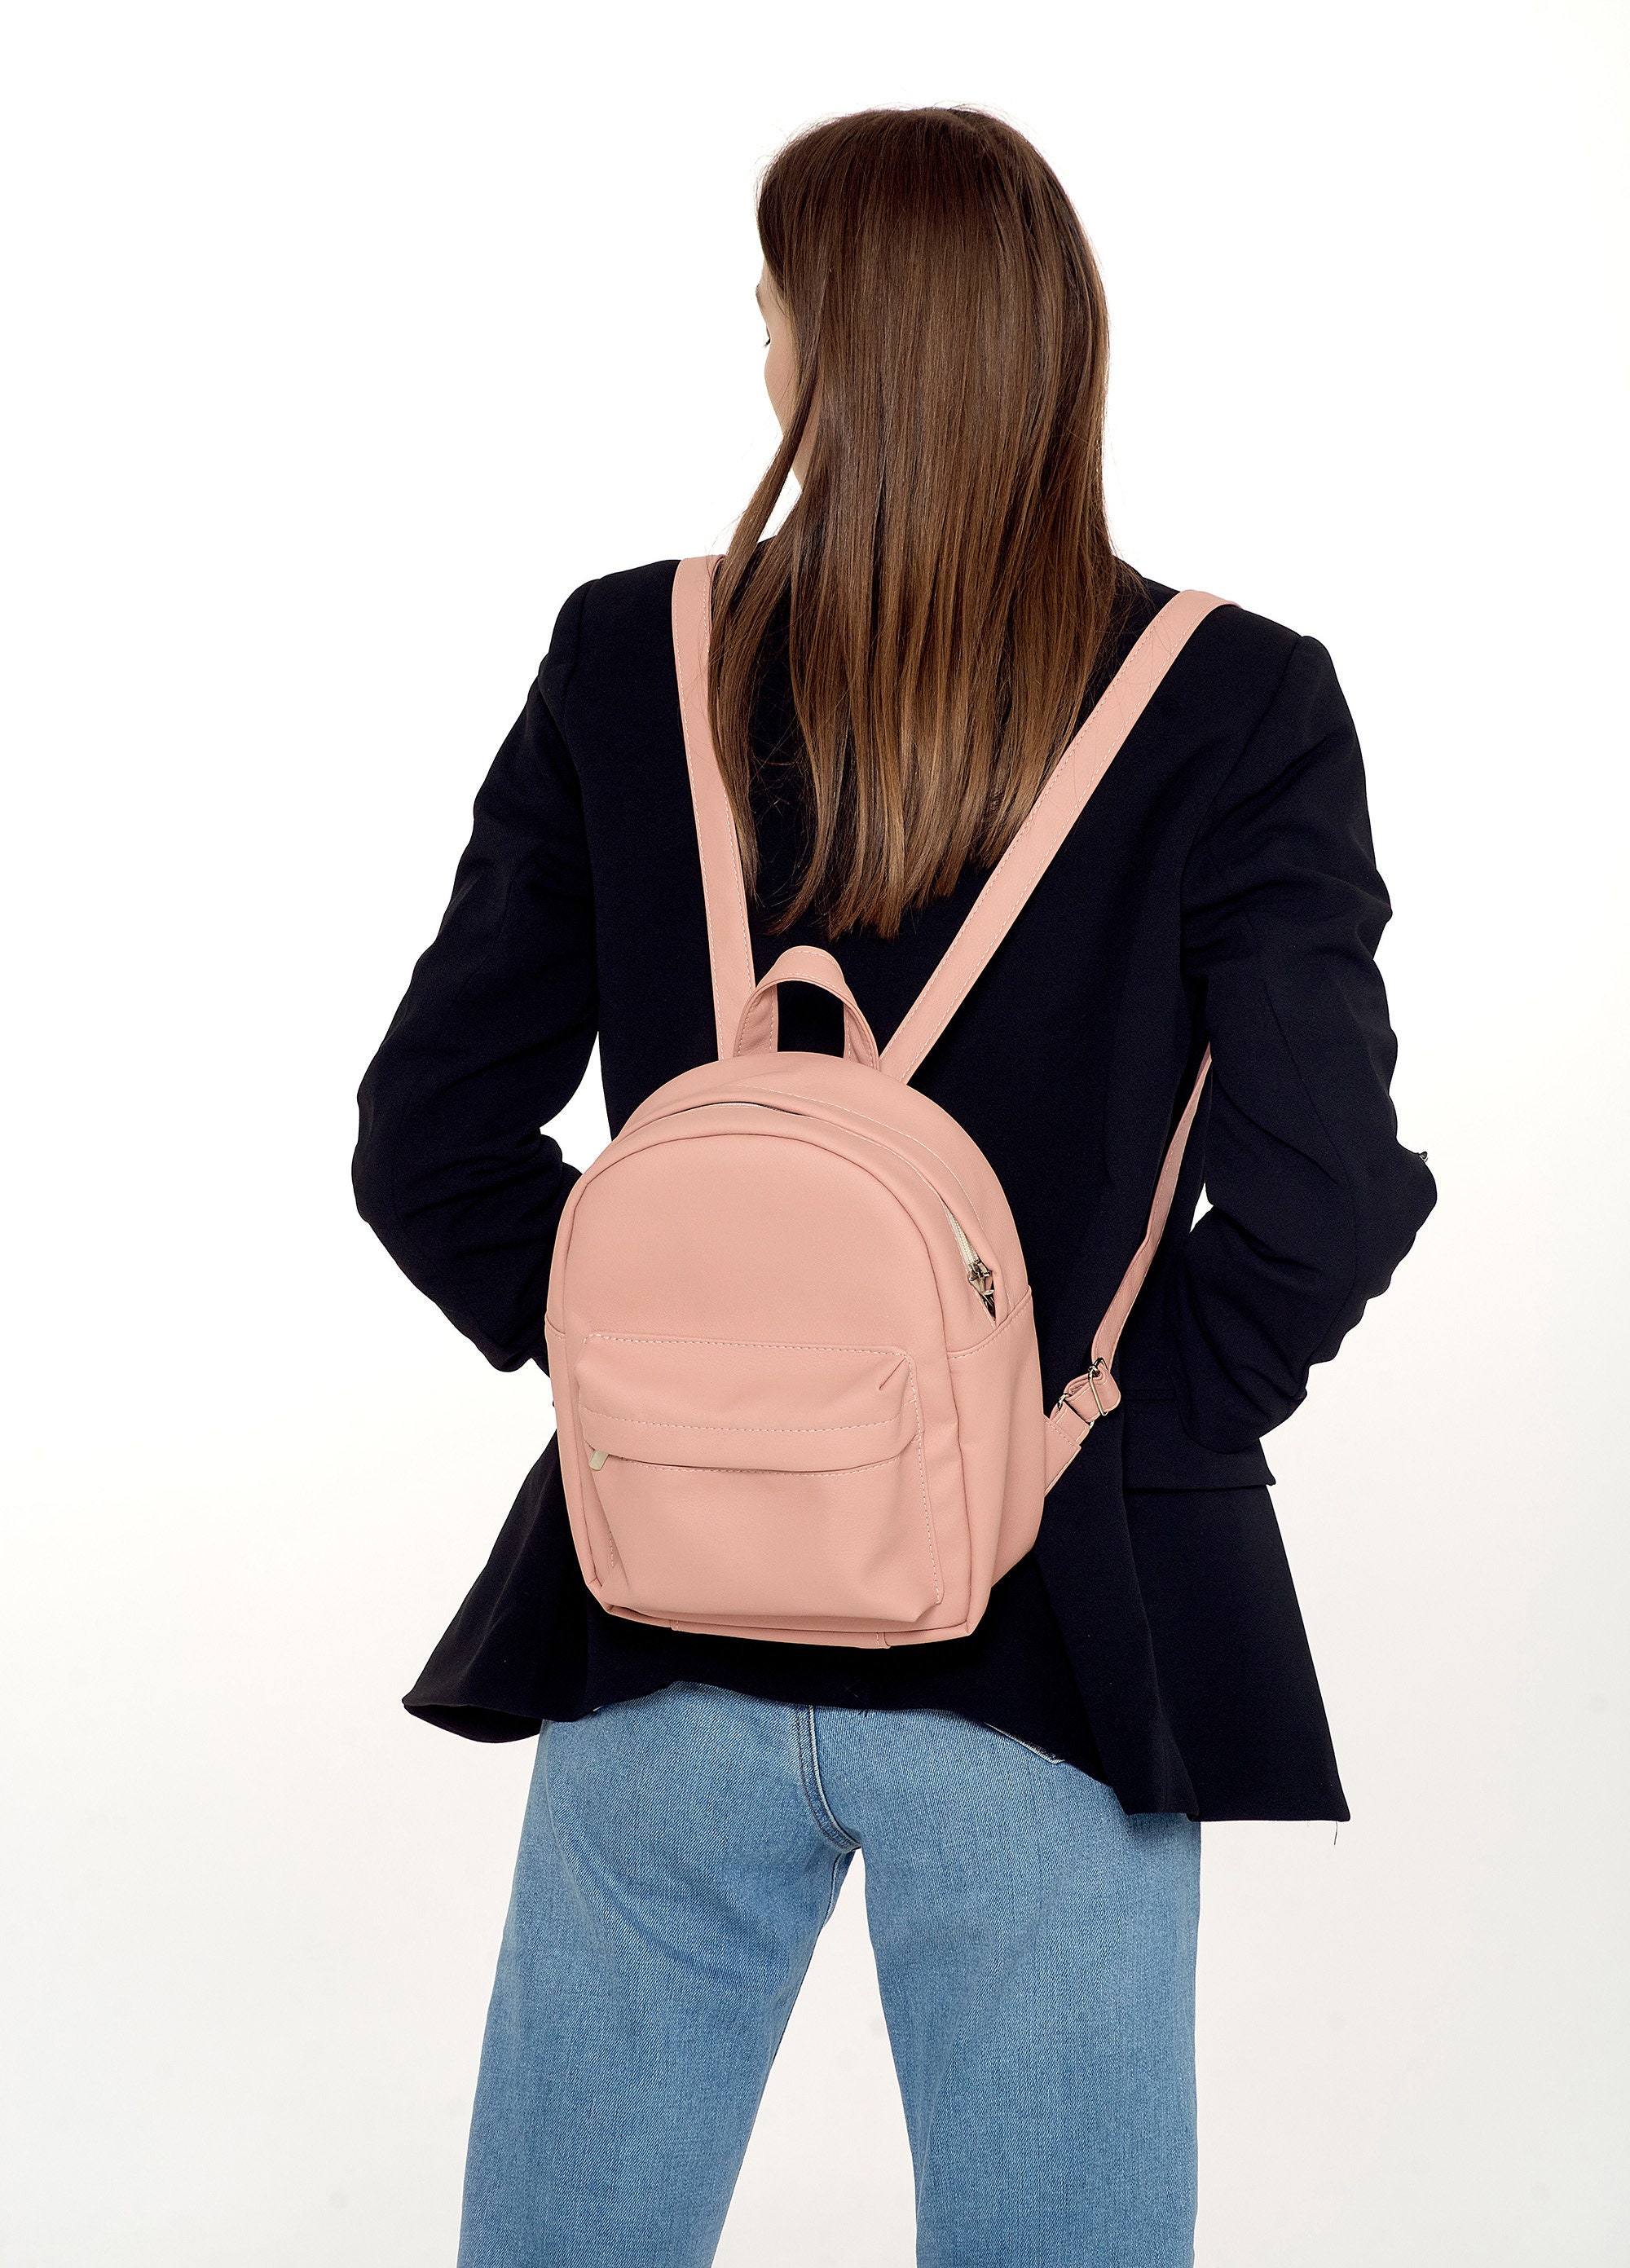 Eco Leather Backpack Women Women Backpack Pink Backpack - Etsy